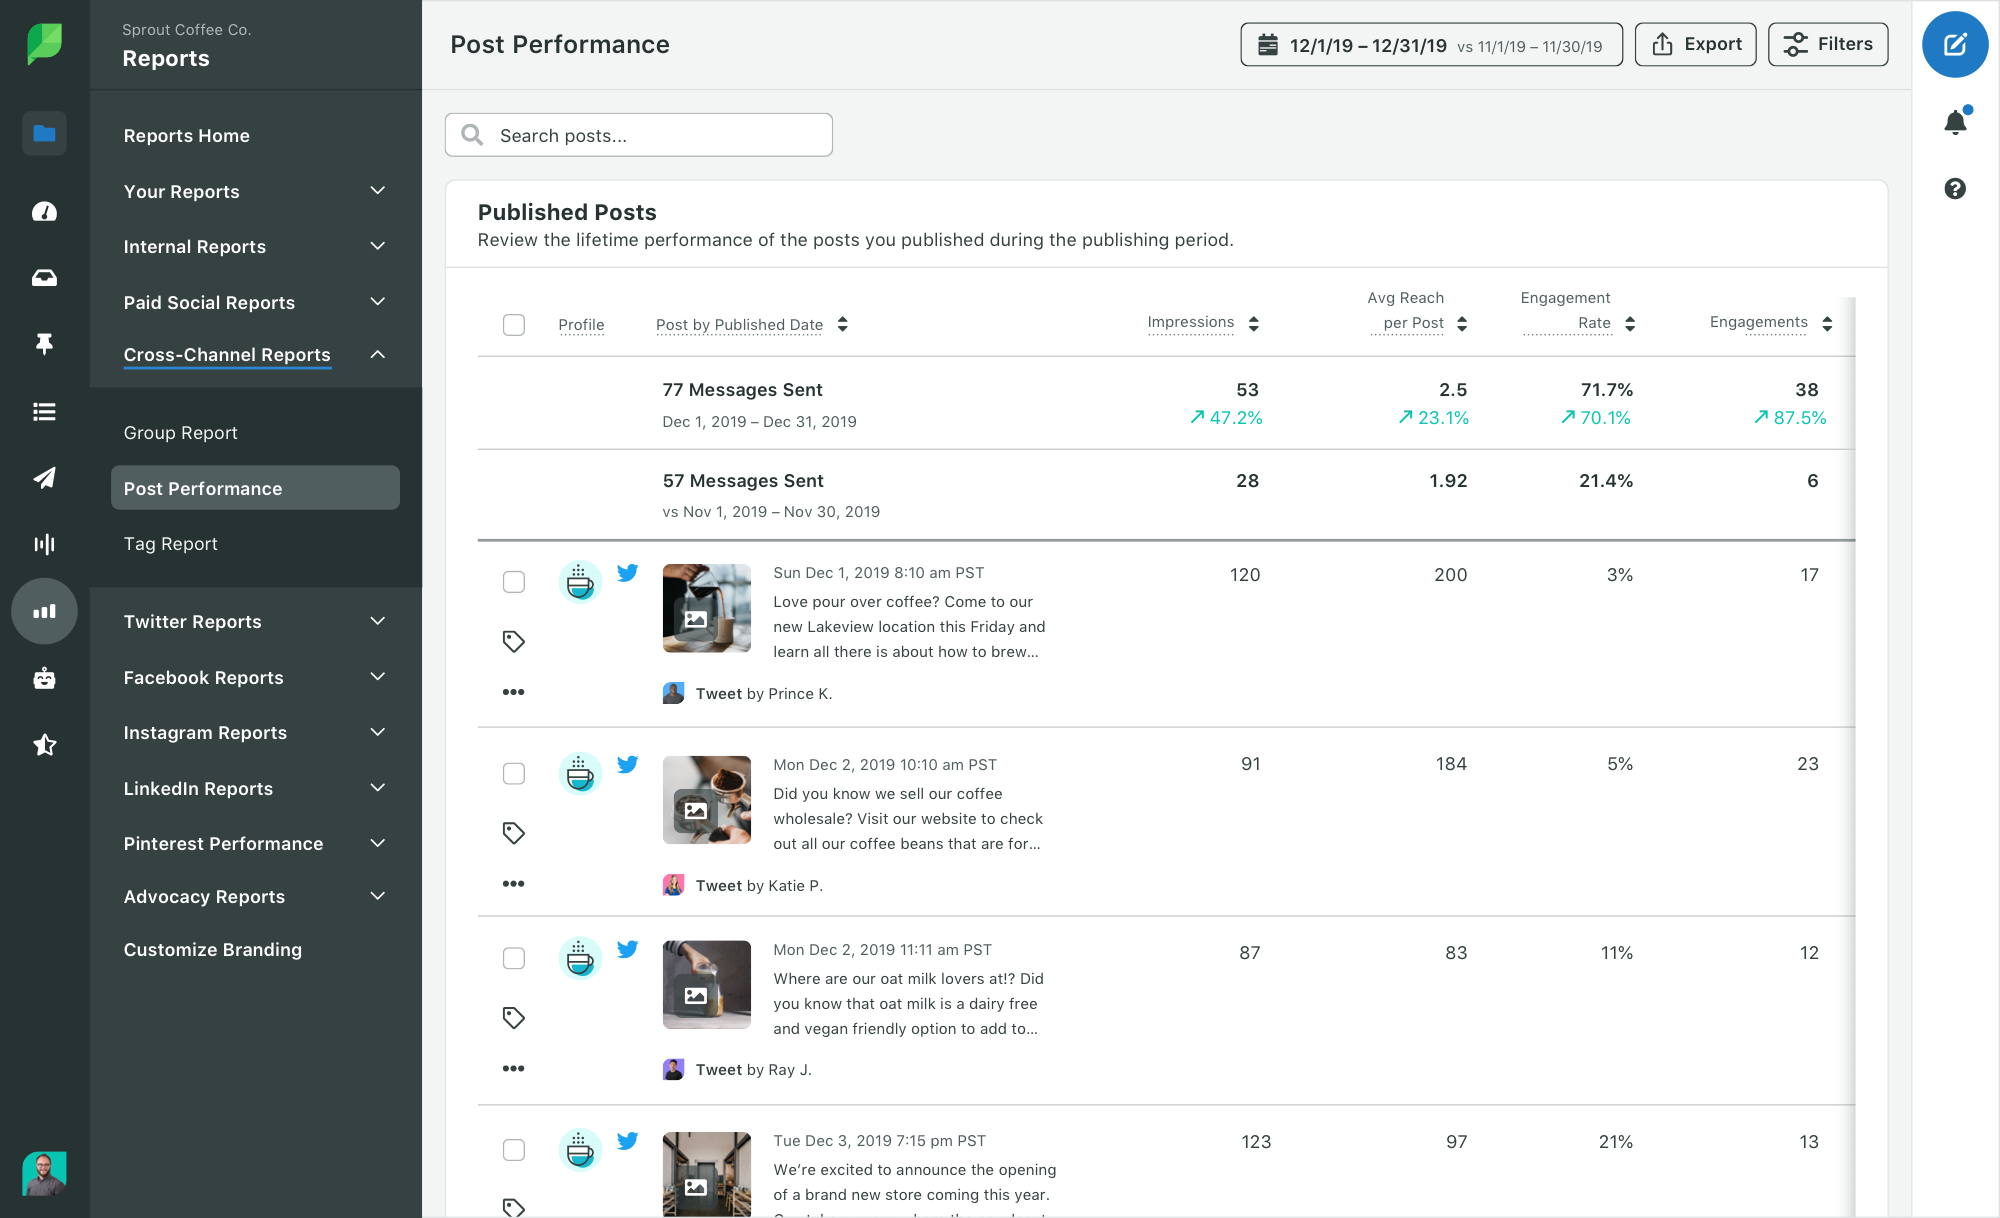 Screenshot of Sprout Social's Twitter Post Performance report